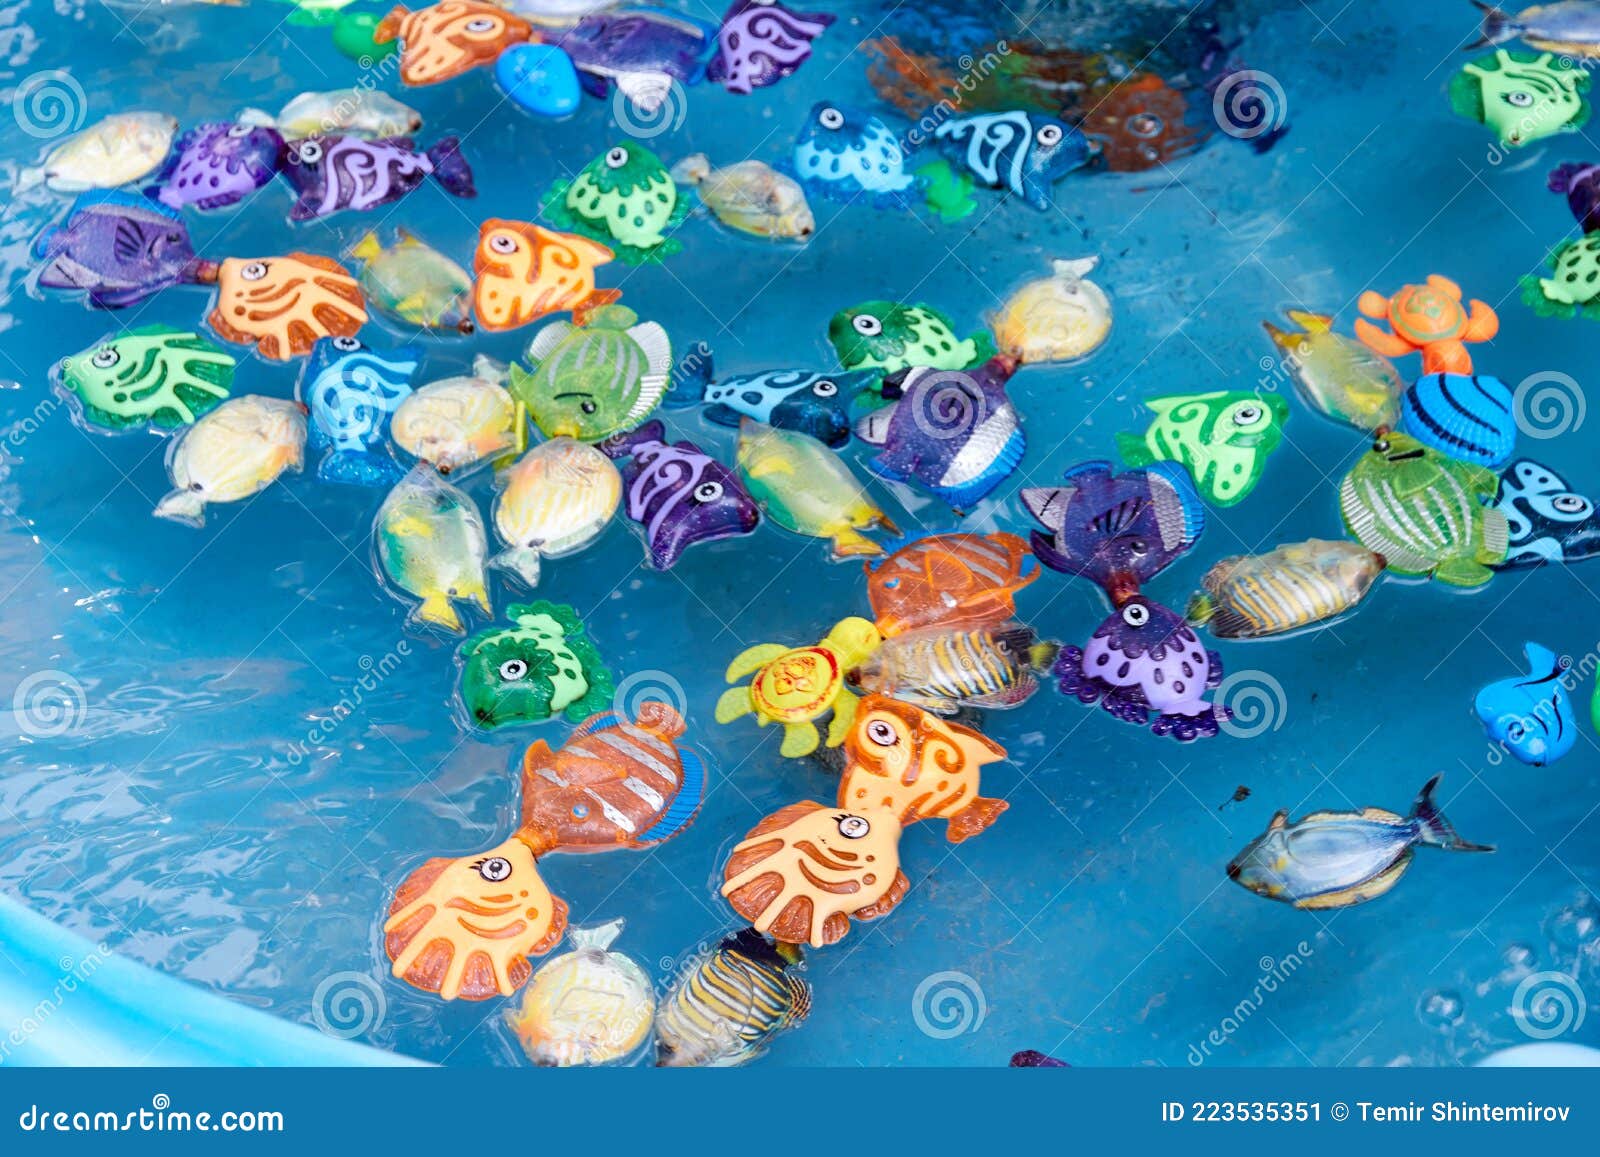 Plastic Fish Toys for Children S Fishing Attraction Stock Image - Image of  pool, entertainment: 223535351